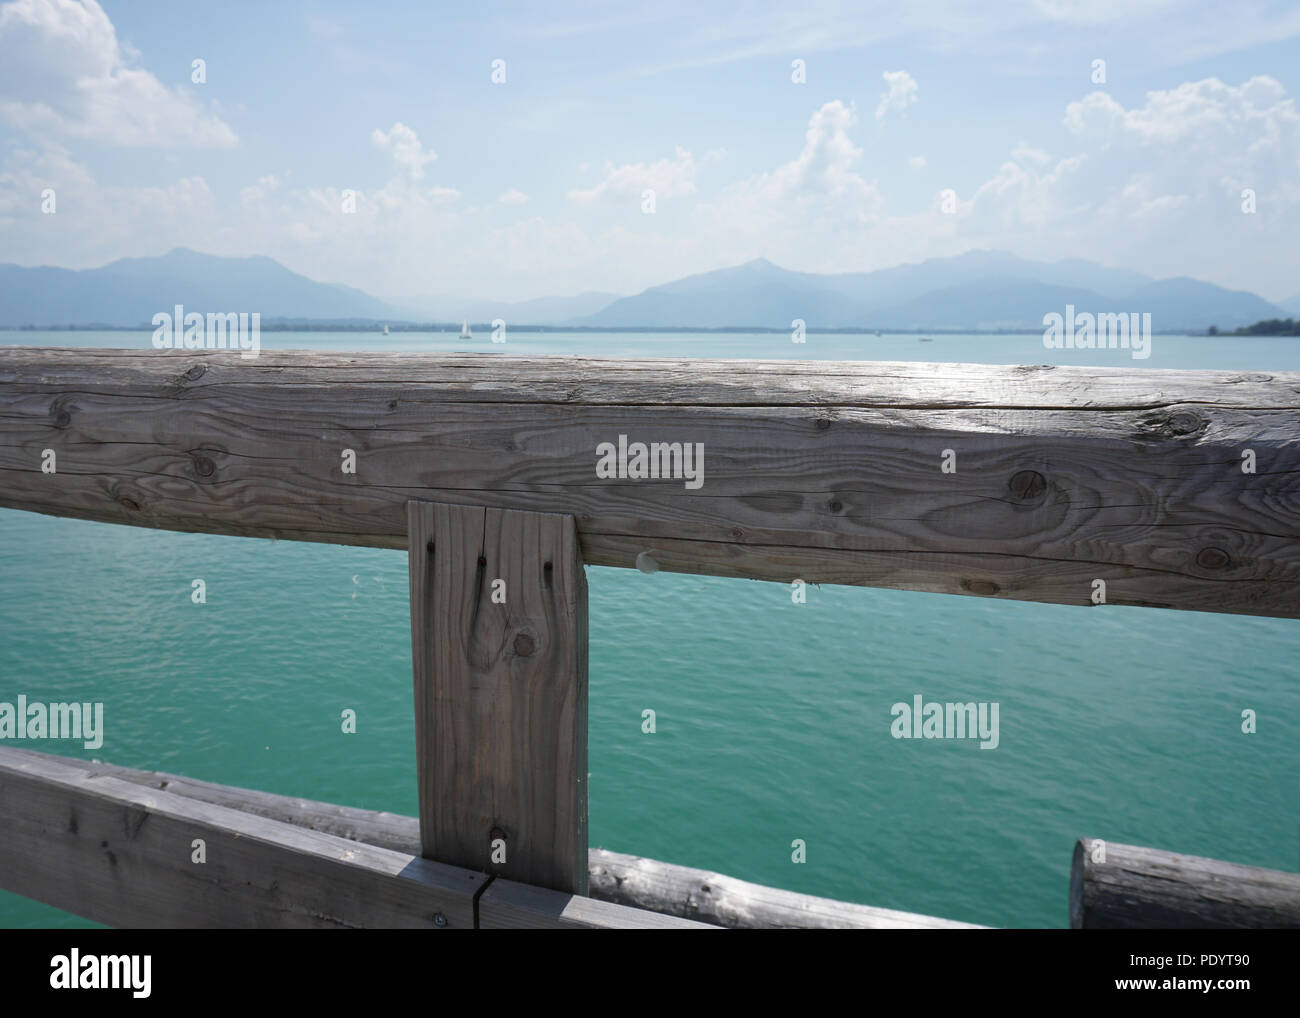 wooden balustrade and turquoise blue lake Stock Photo